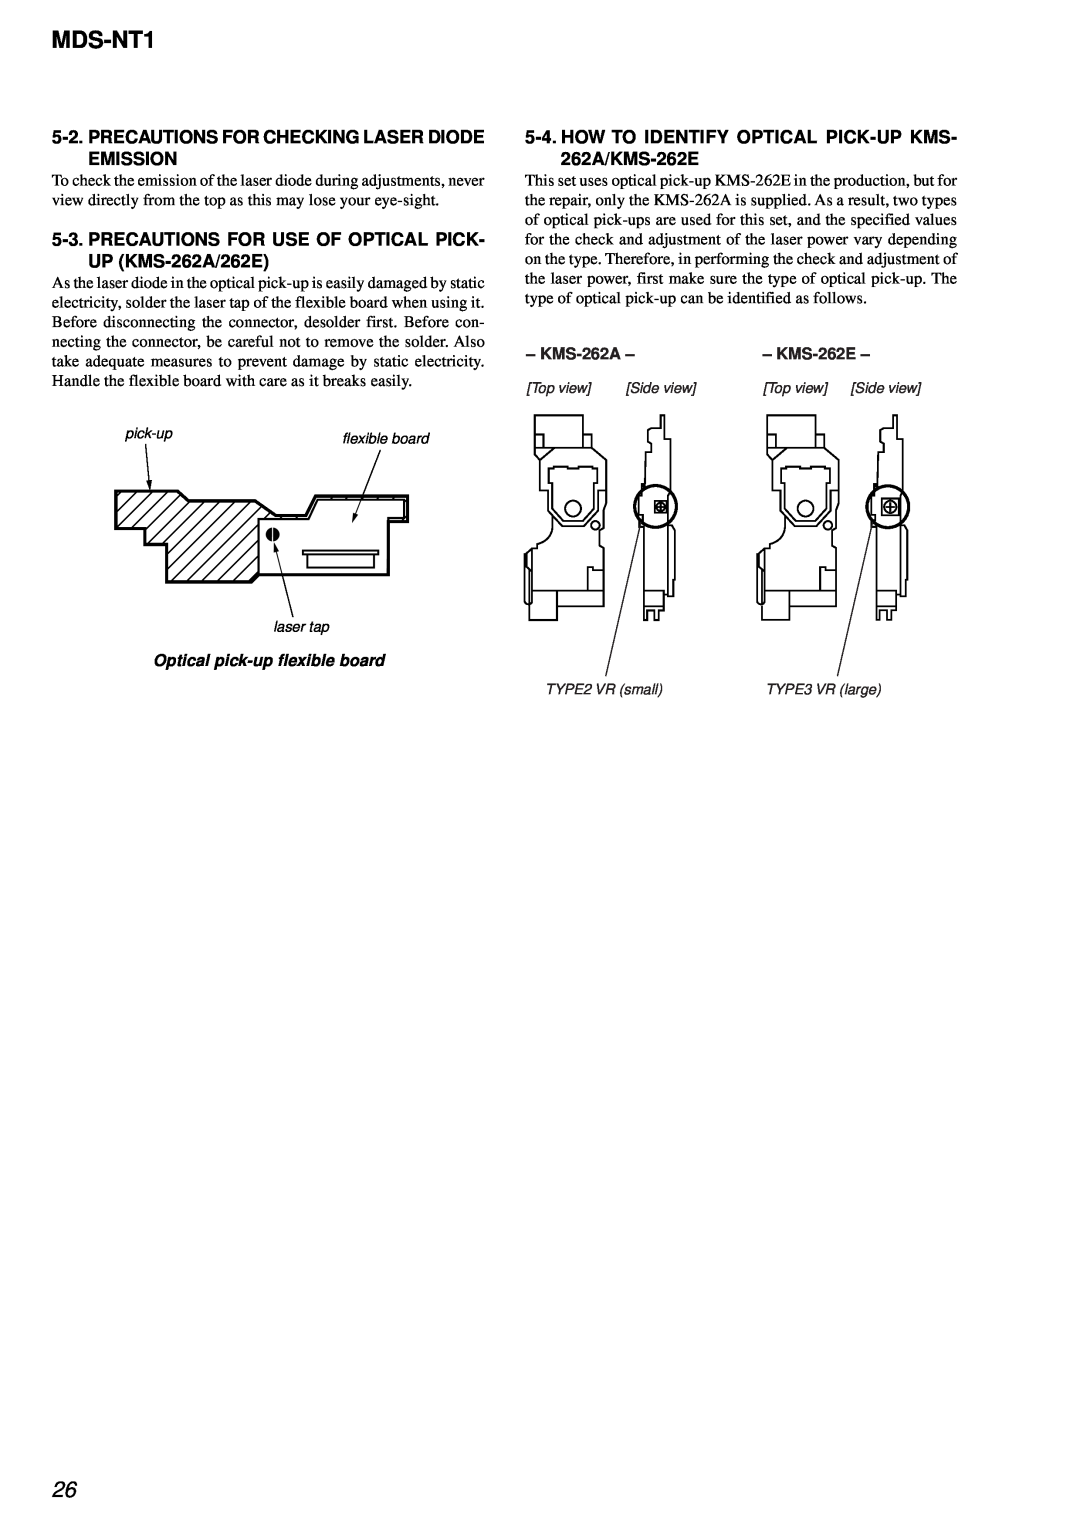 Sony MDS-NT1 service manual Precautions For Checking Laser Diode Emission 